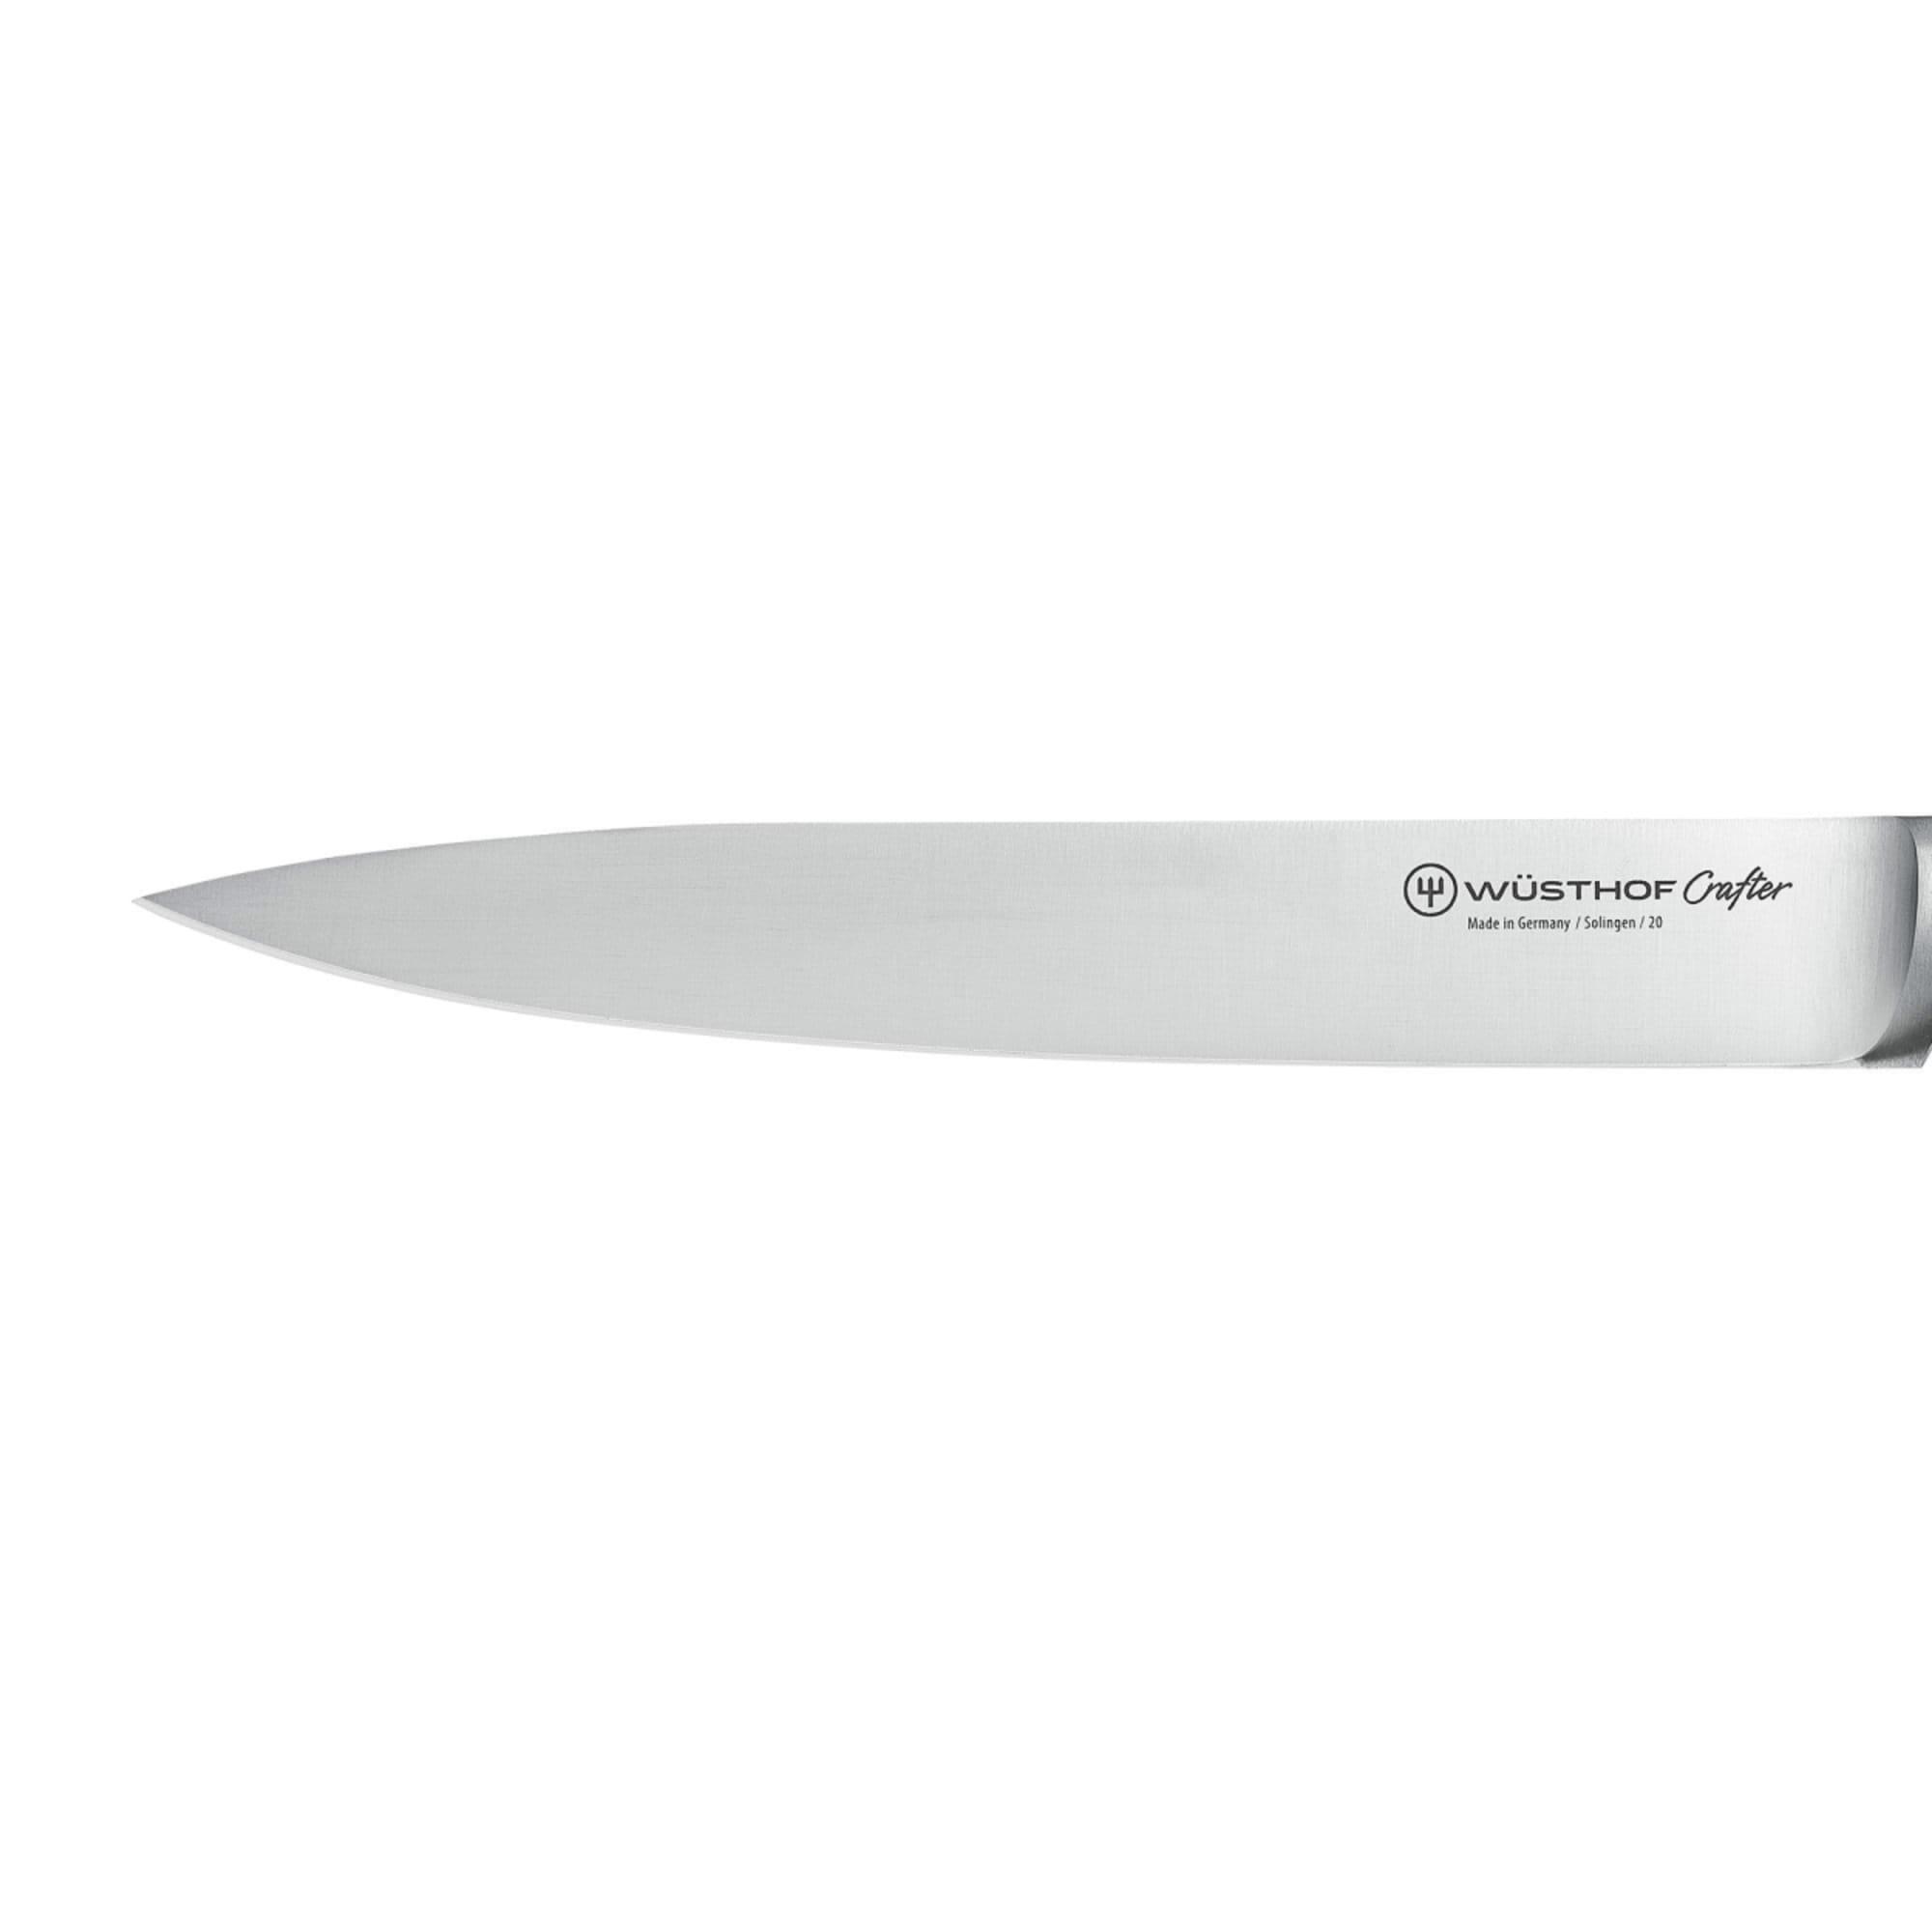 Wusthof Crafter Carving Knife 20cm Image 3